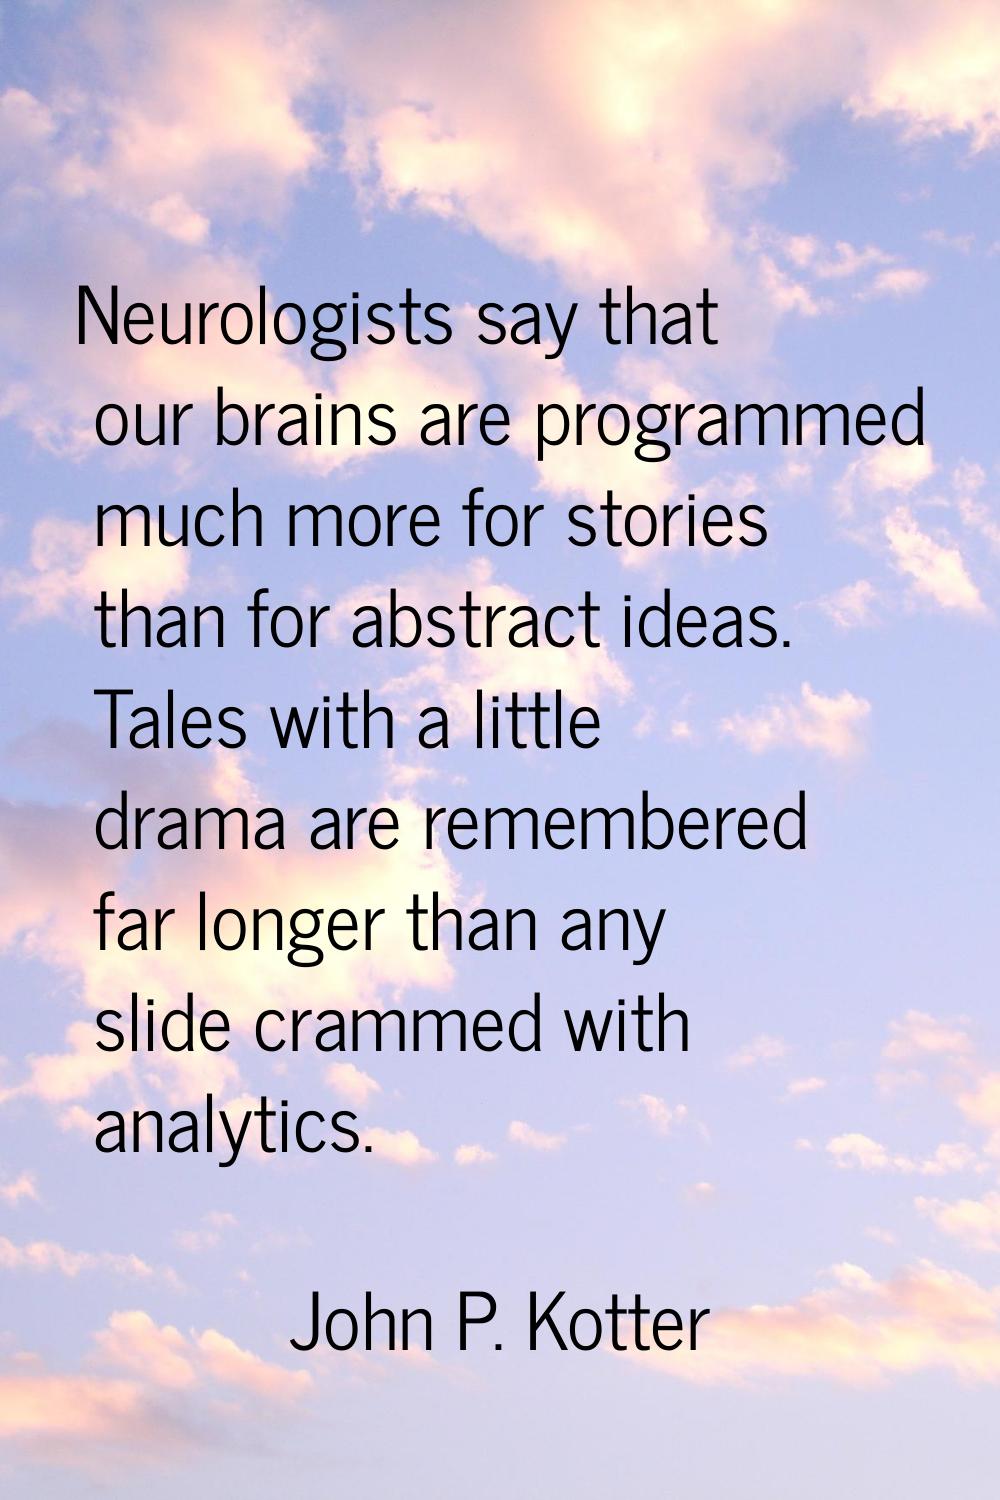 Neurologists say that our brains are programmed much more for stories than for abstract ideas. Tale